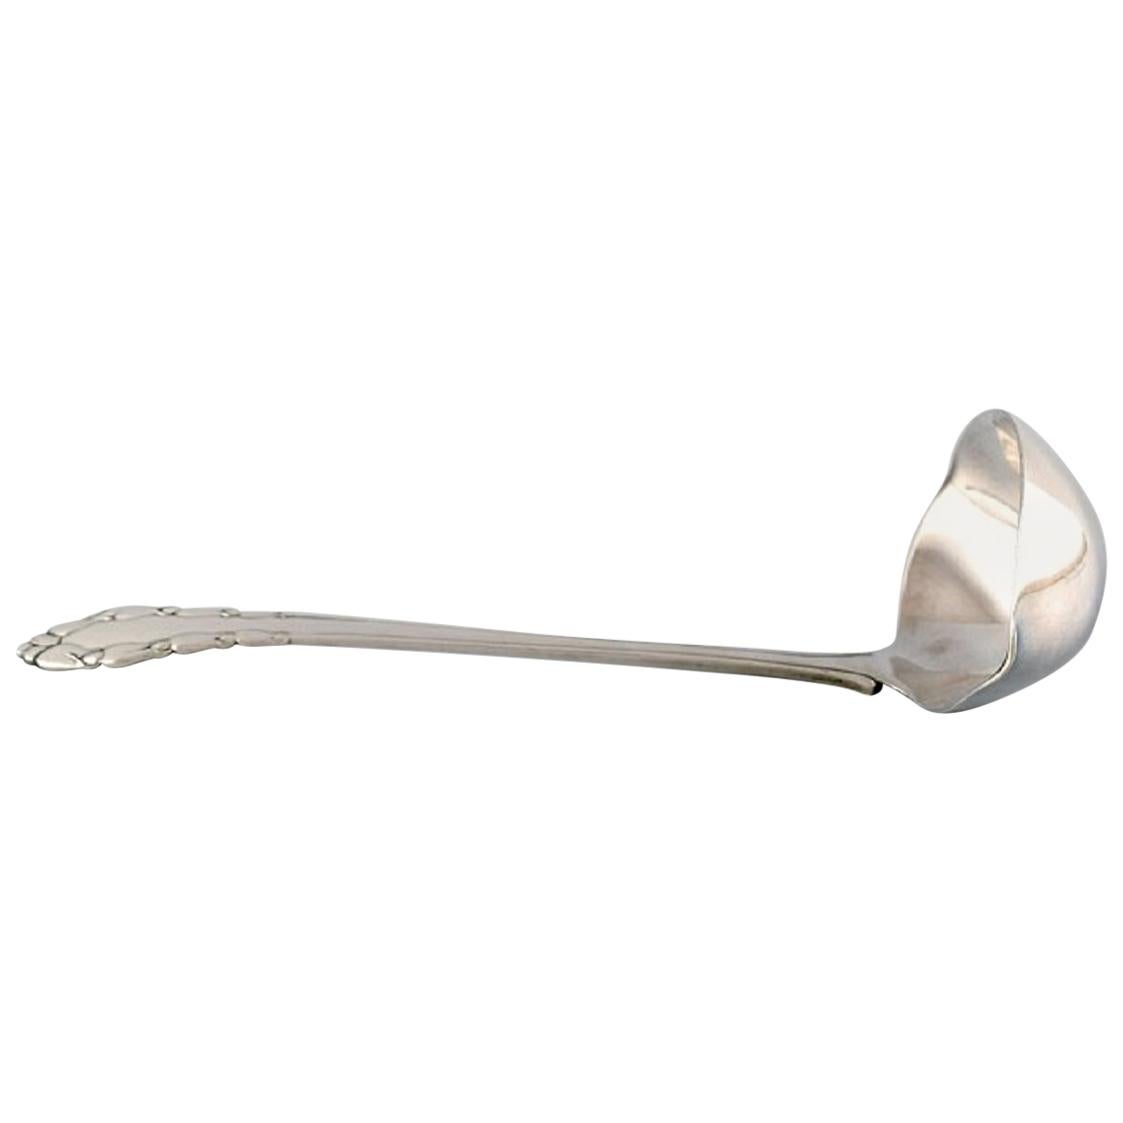 Georg Jensen "Lily of the Valley" Sauce Spoon in Full Silver For Sale